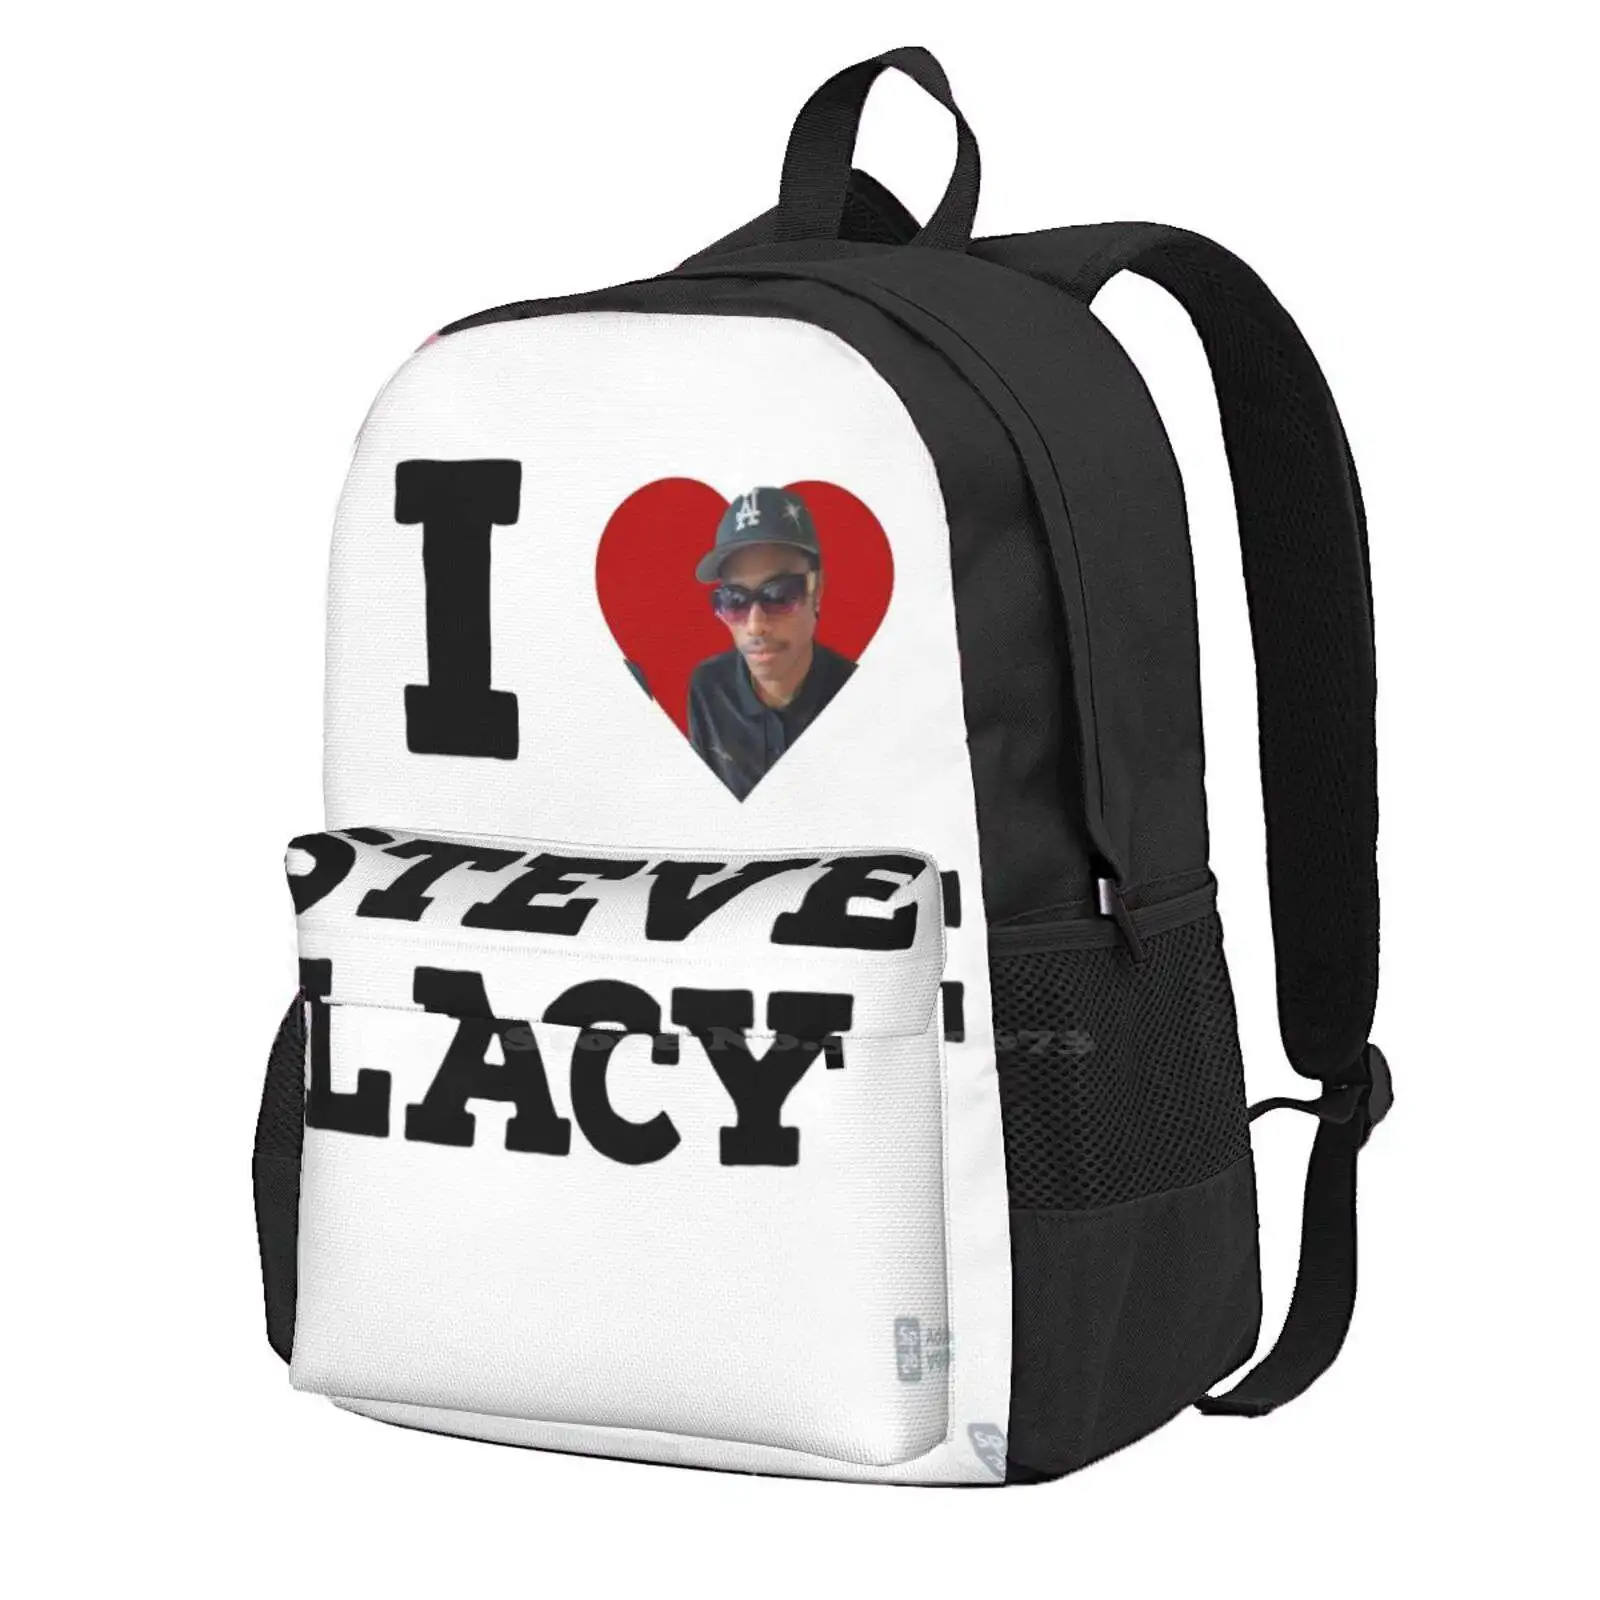 

I Heart Steve Lacy Bag Backpack For Men Women Girls Teenage Music Tyler The Creator The Internet Indie Syd Apollo Xxi Kali